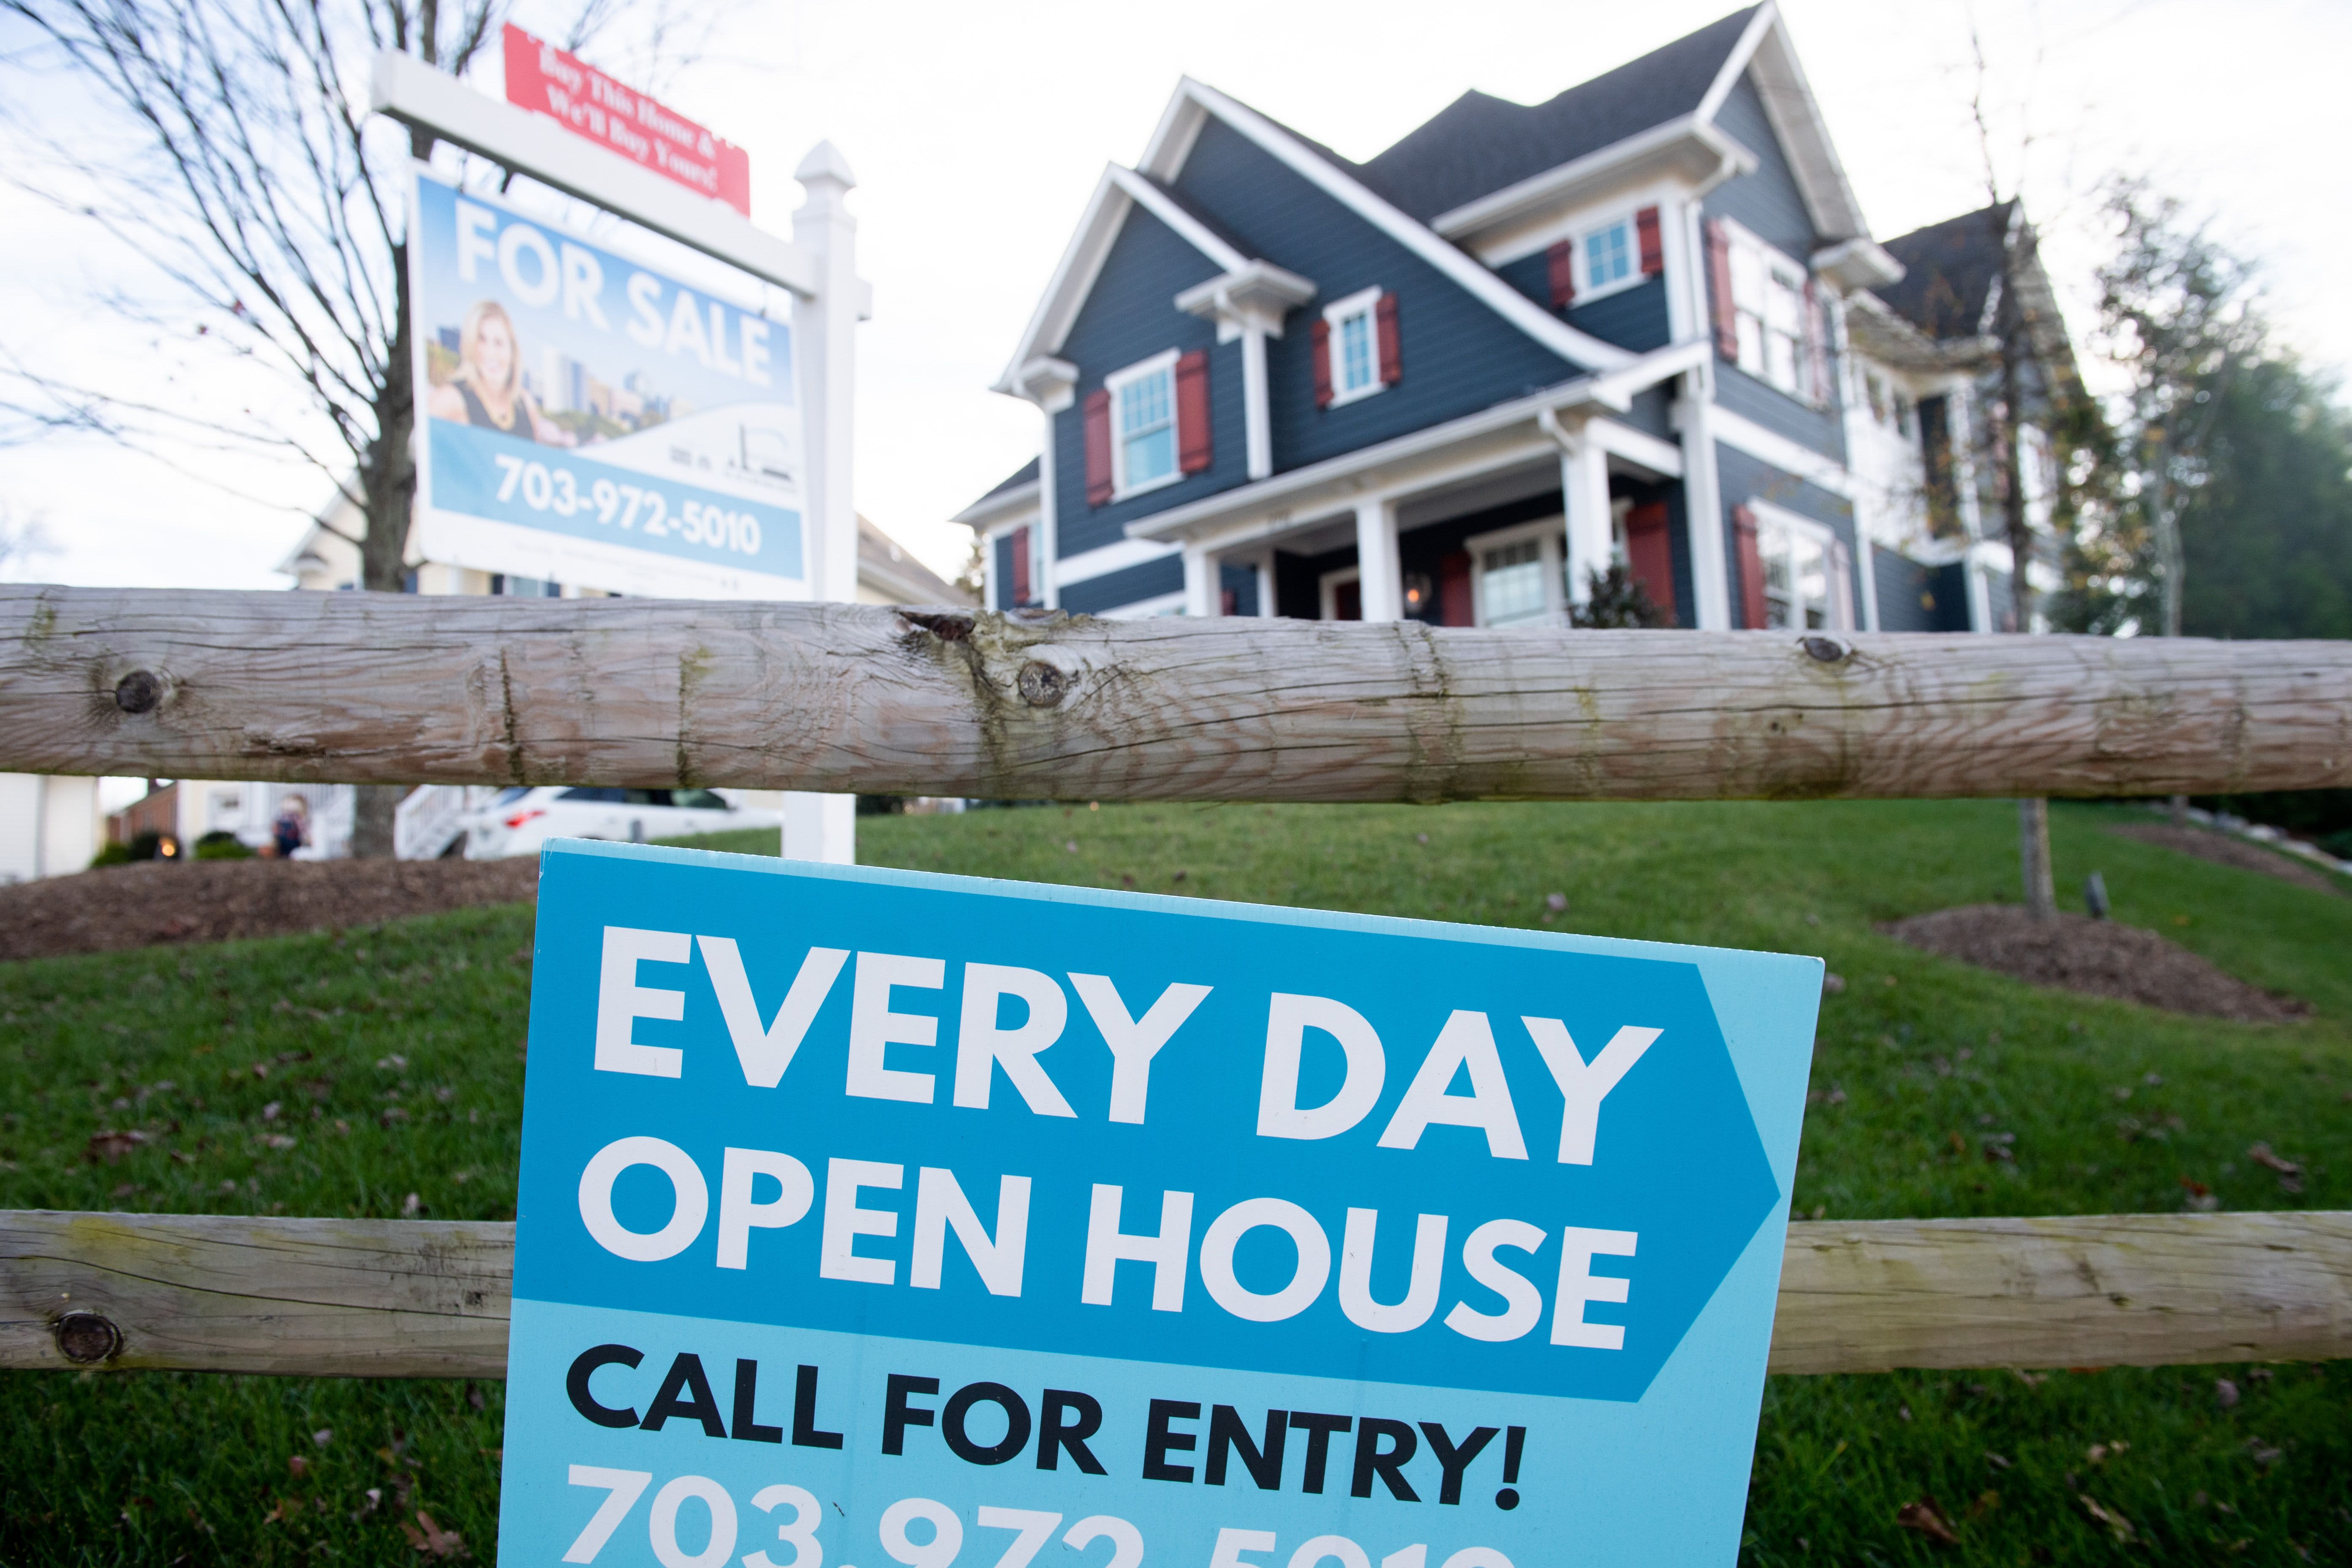 Mortgage refinancing drops 43% from a year ago